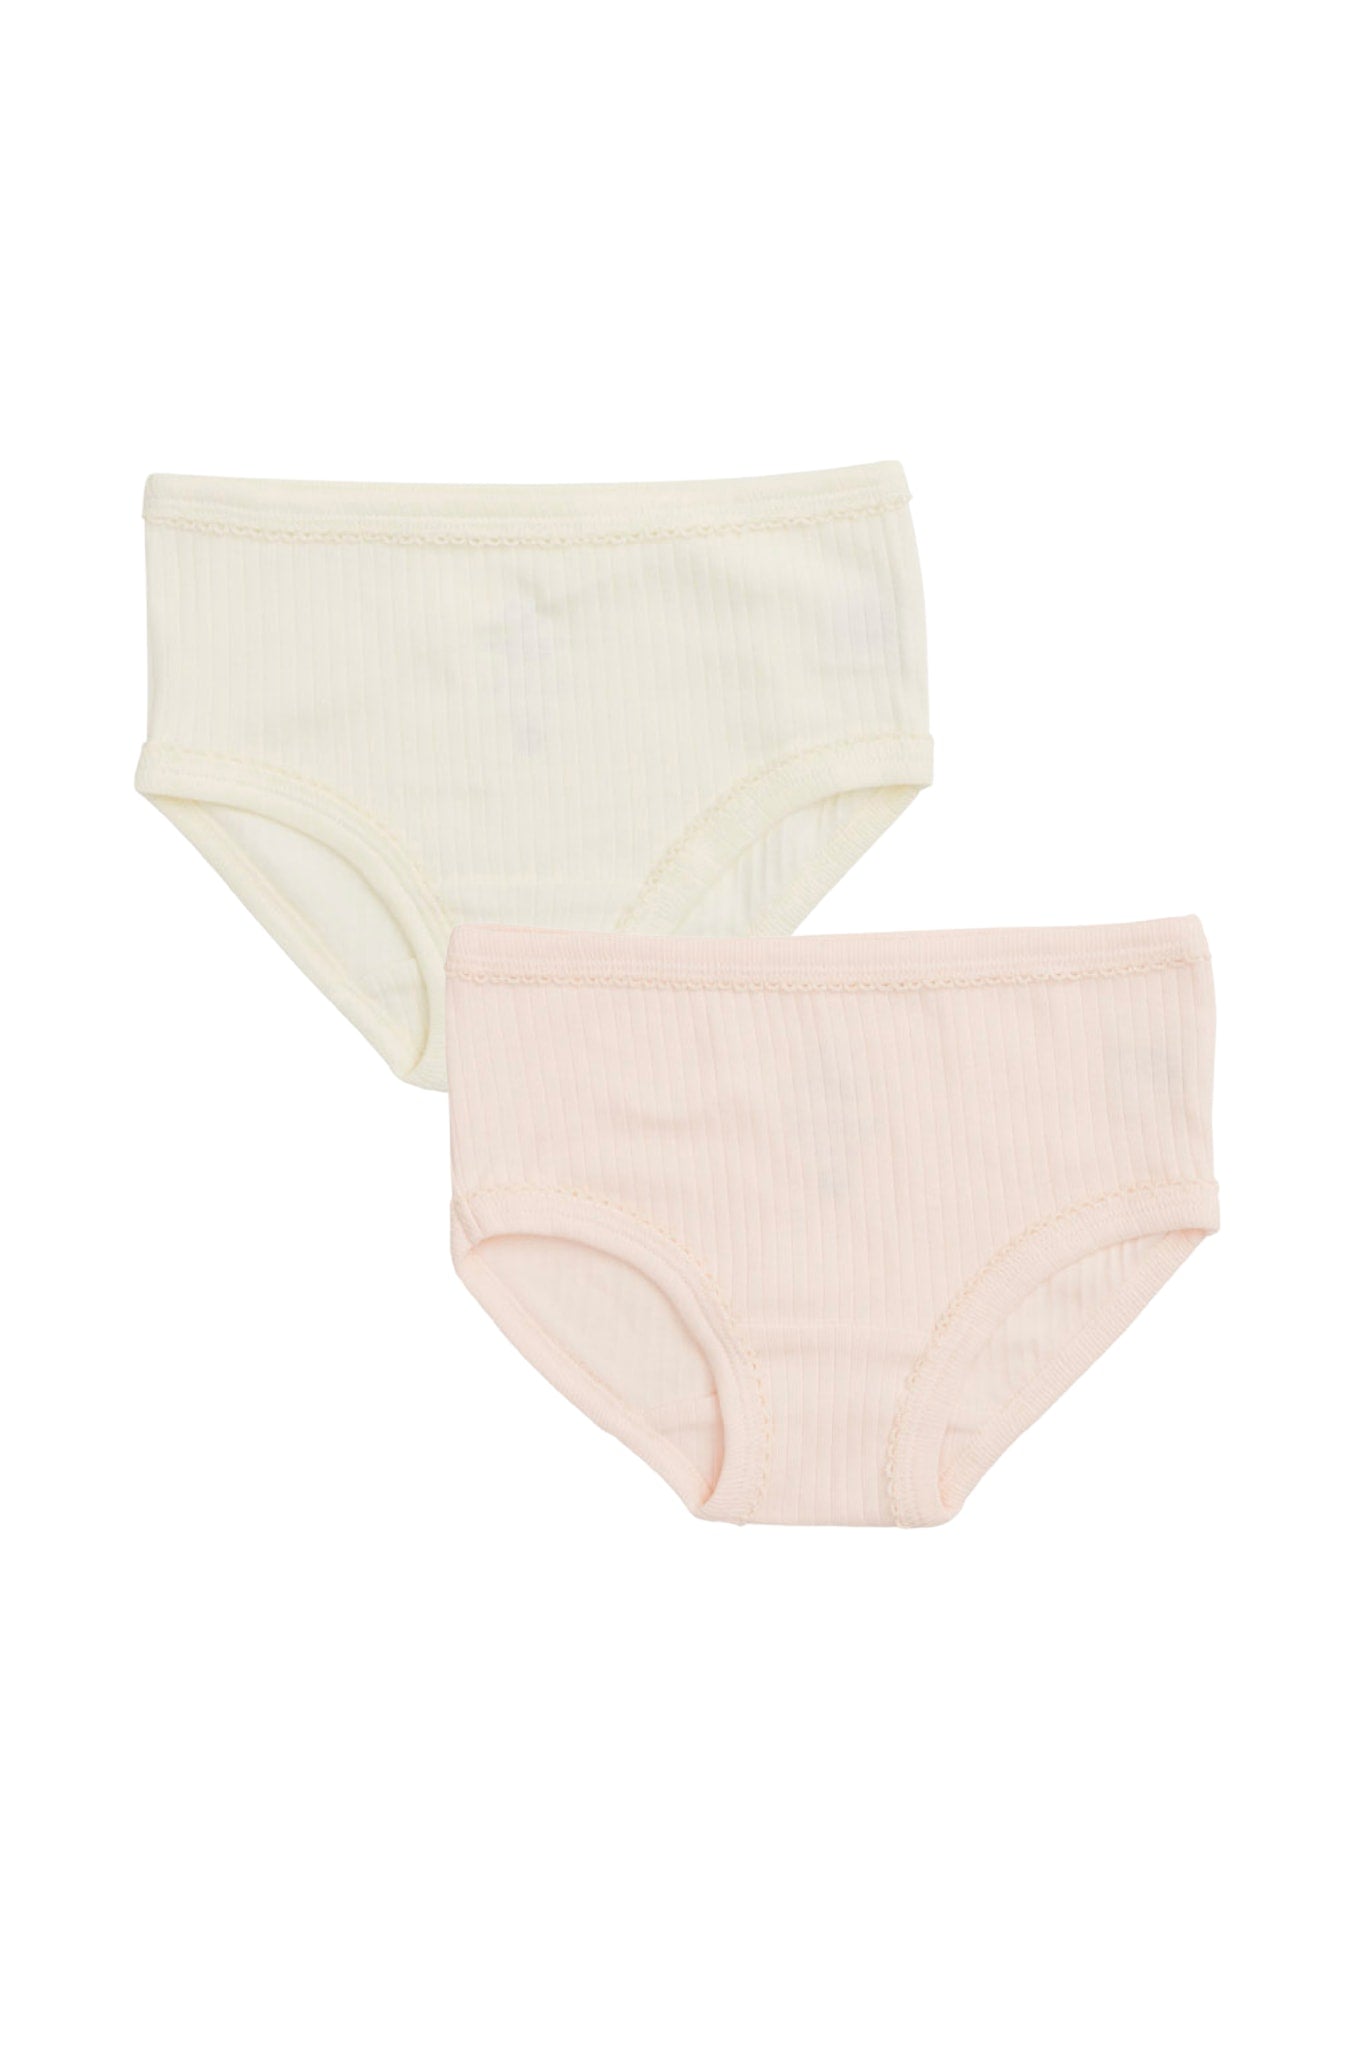 RIB JERSEY 2PACK UNDERPANTS - SOFT PINK/ CREAM COMB. CORE